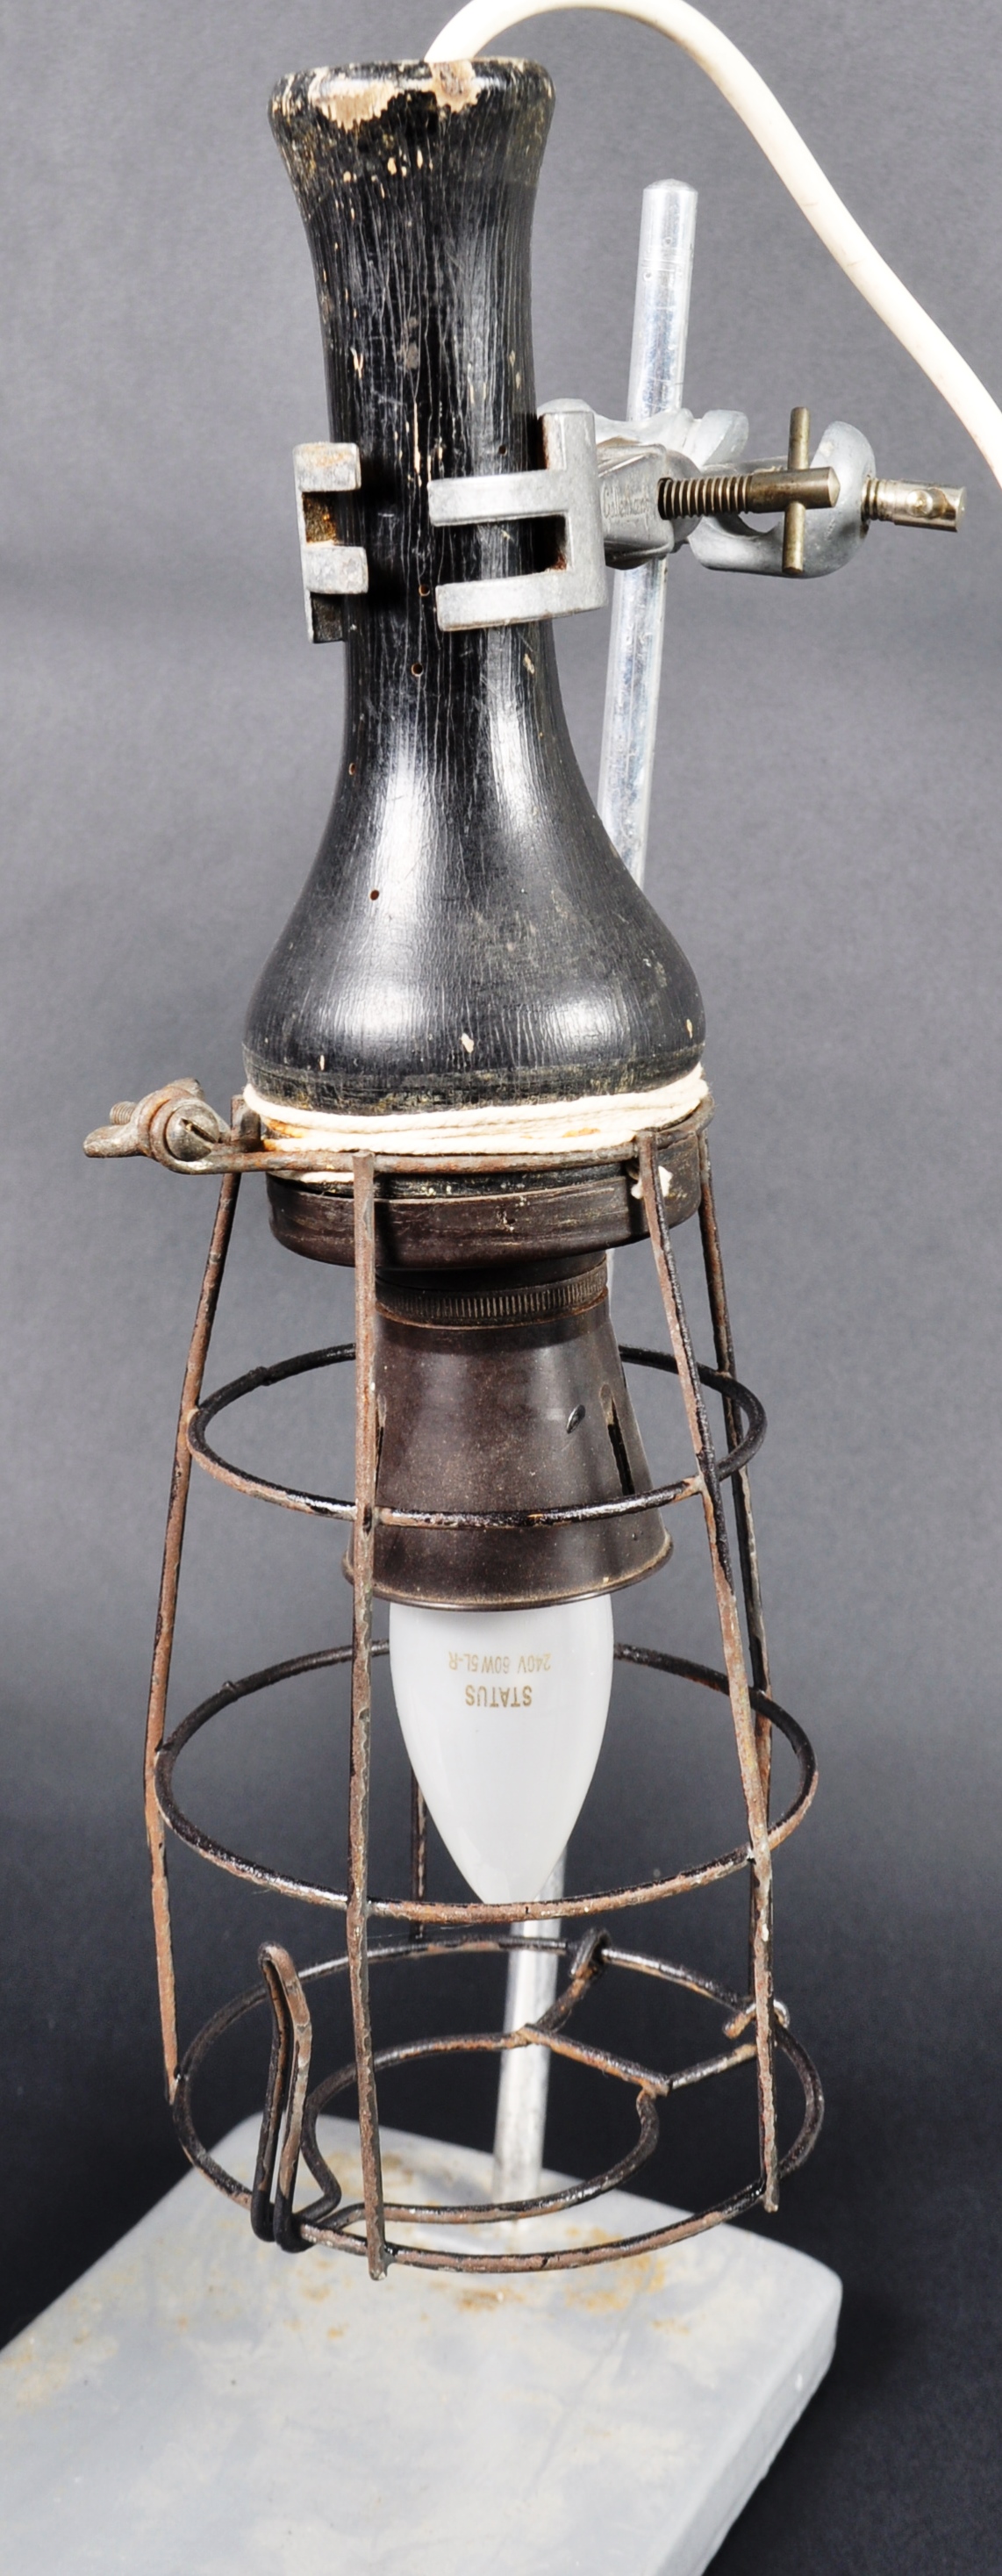 PAIR OF MID CENTURY INSPECTION LAMPS ON SCIENTIFIC STANDS - Image 3 of 6